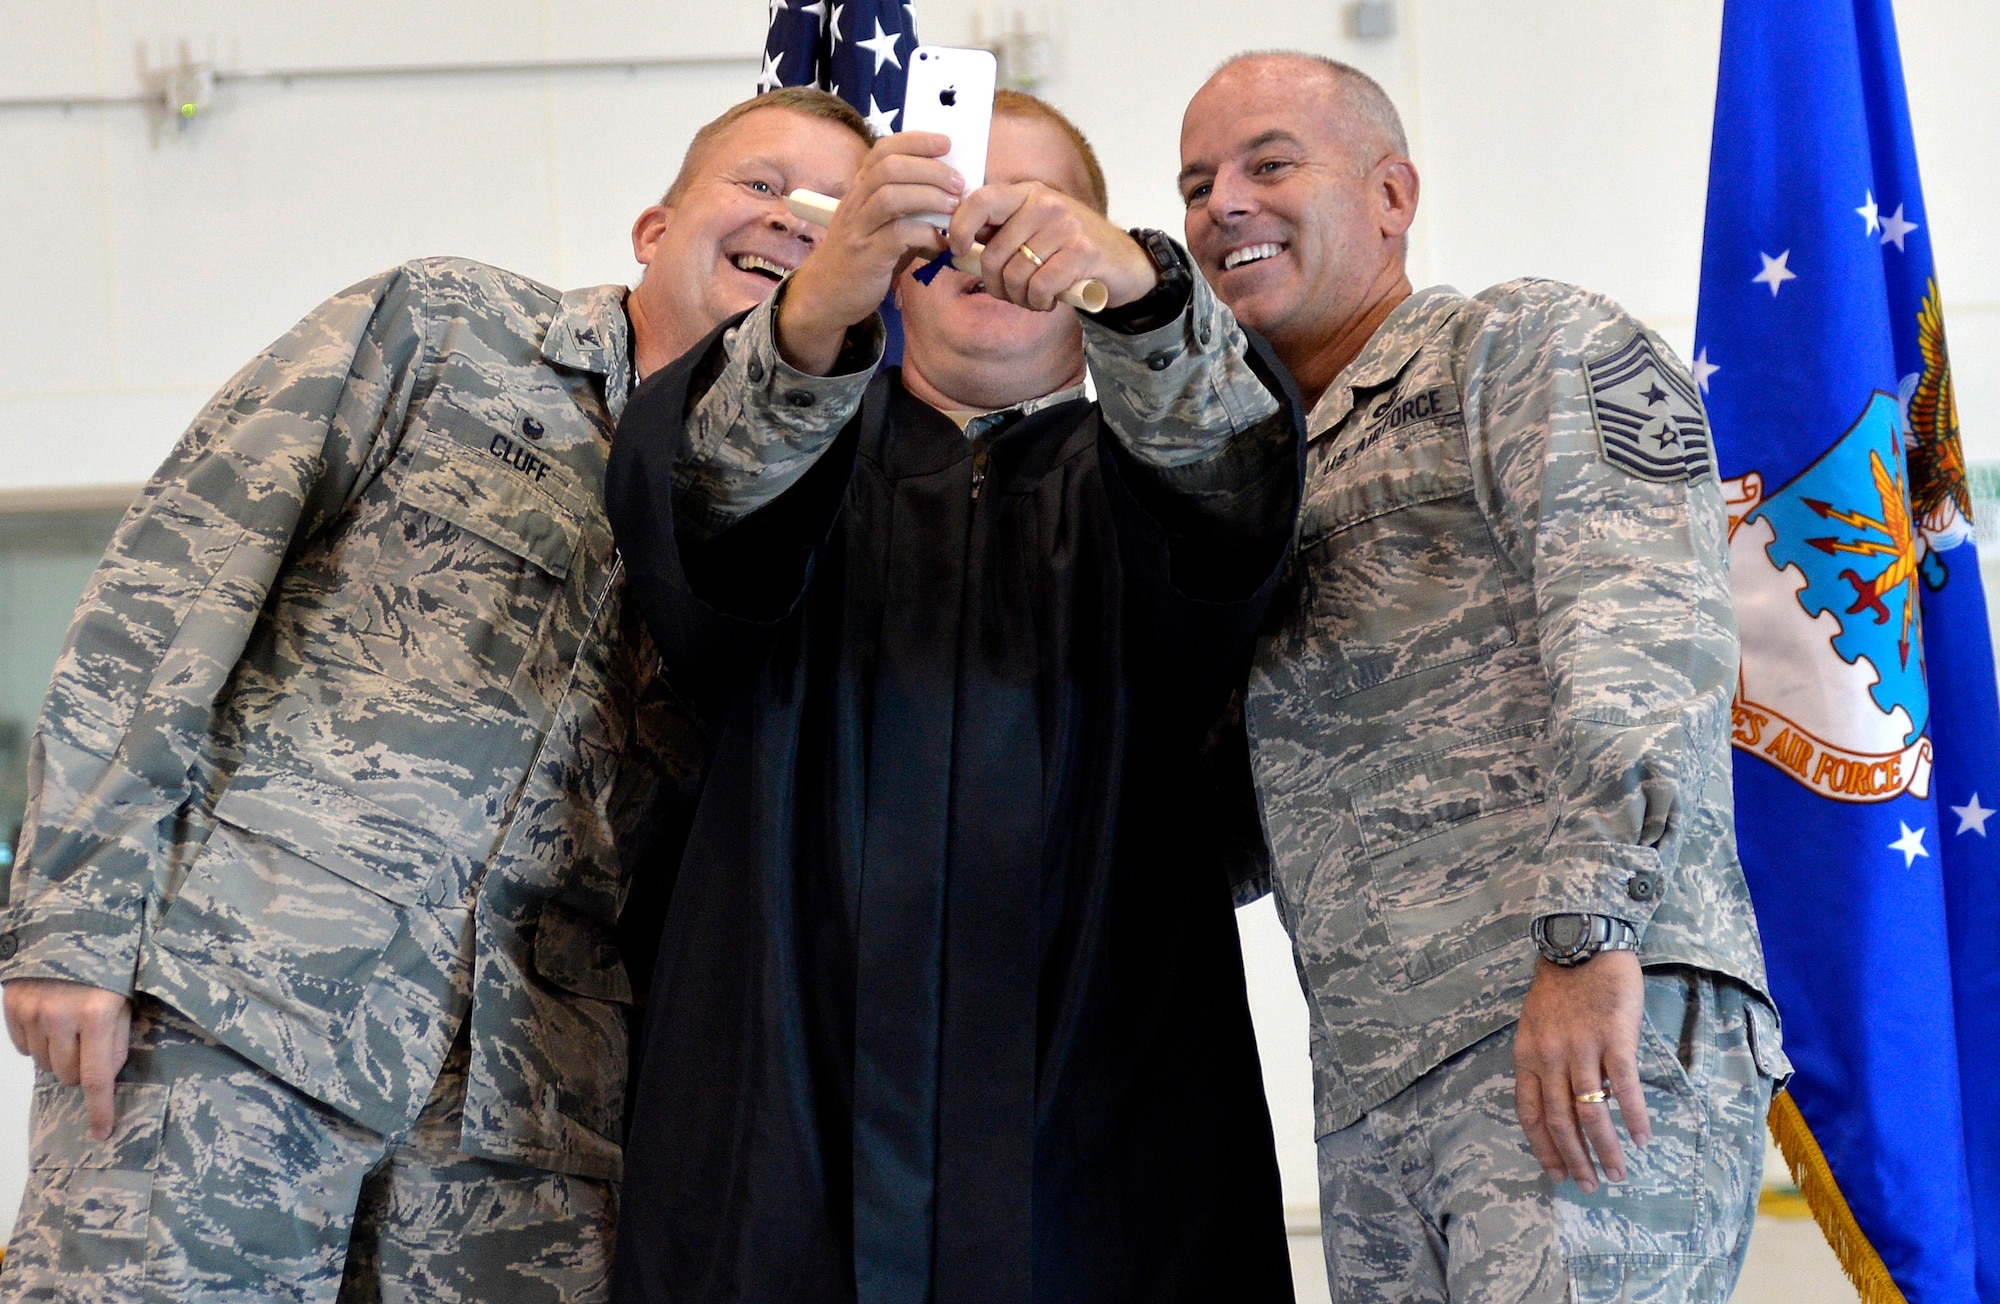 Master Sergeant Bryan Teeples, 15th Reconnaissance Squadron first sergeant, takes a selfie with Col. James Cluff, 432nd Wing/432nd Air Expeditionary Wing commander, and Chief Master Sergeant Butch Brien, 432nd WG/432nd AEW command chief, at Creech Air Force Base’s first-ever Community College of the Air Force graduation, which took place on base Nov. 14, 2014. Combined, Nellis and Creech Air Force Bases have more than 400 Airmen who received diplomas during the fall CCAF graduating class. (U.S. Air Force photo by Staff Sgt. Adawn Kelsey/Released)